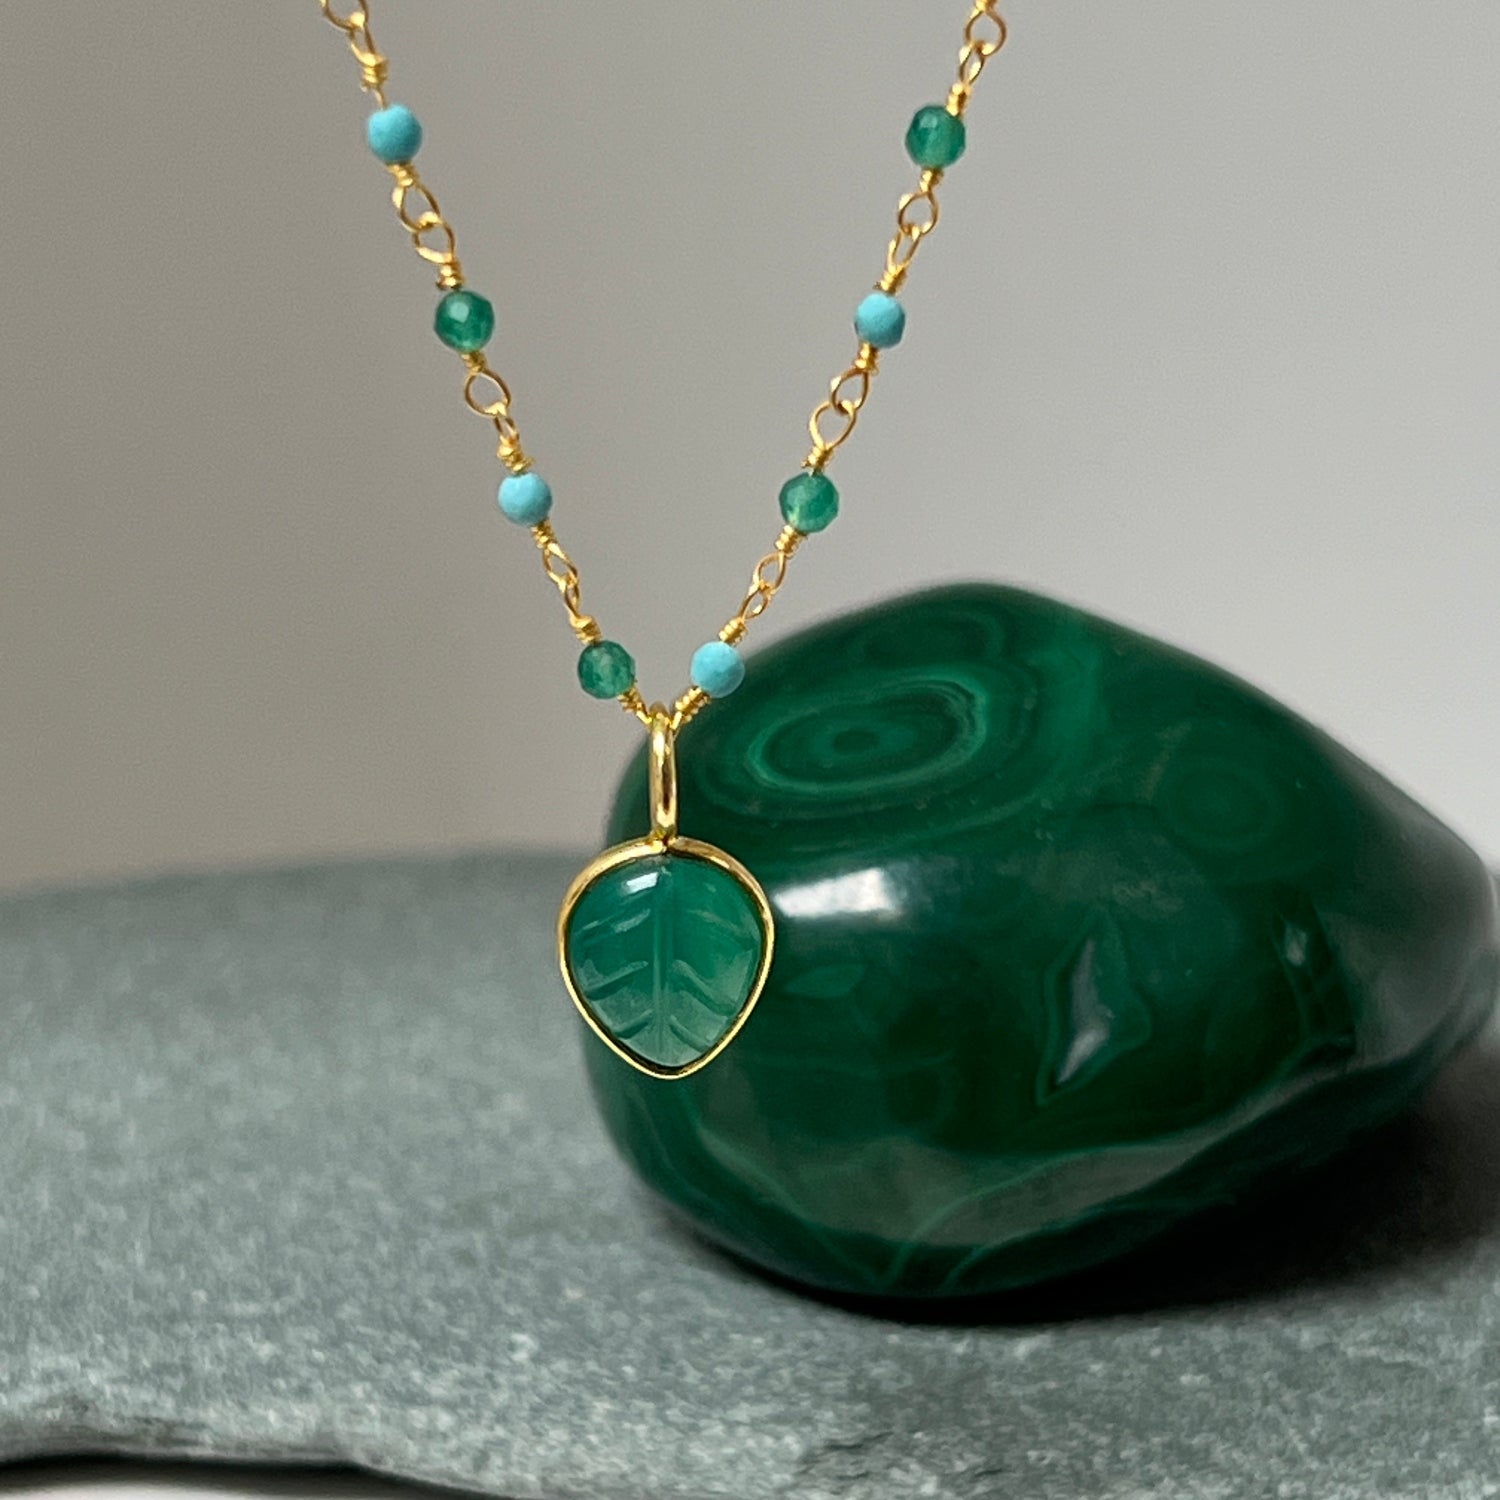 Green and Blue Jade Rosary with Carved Green Onyx Leaf Pendant